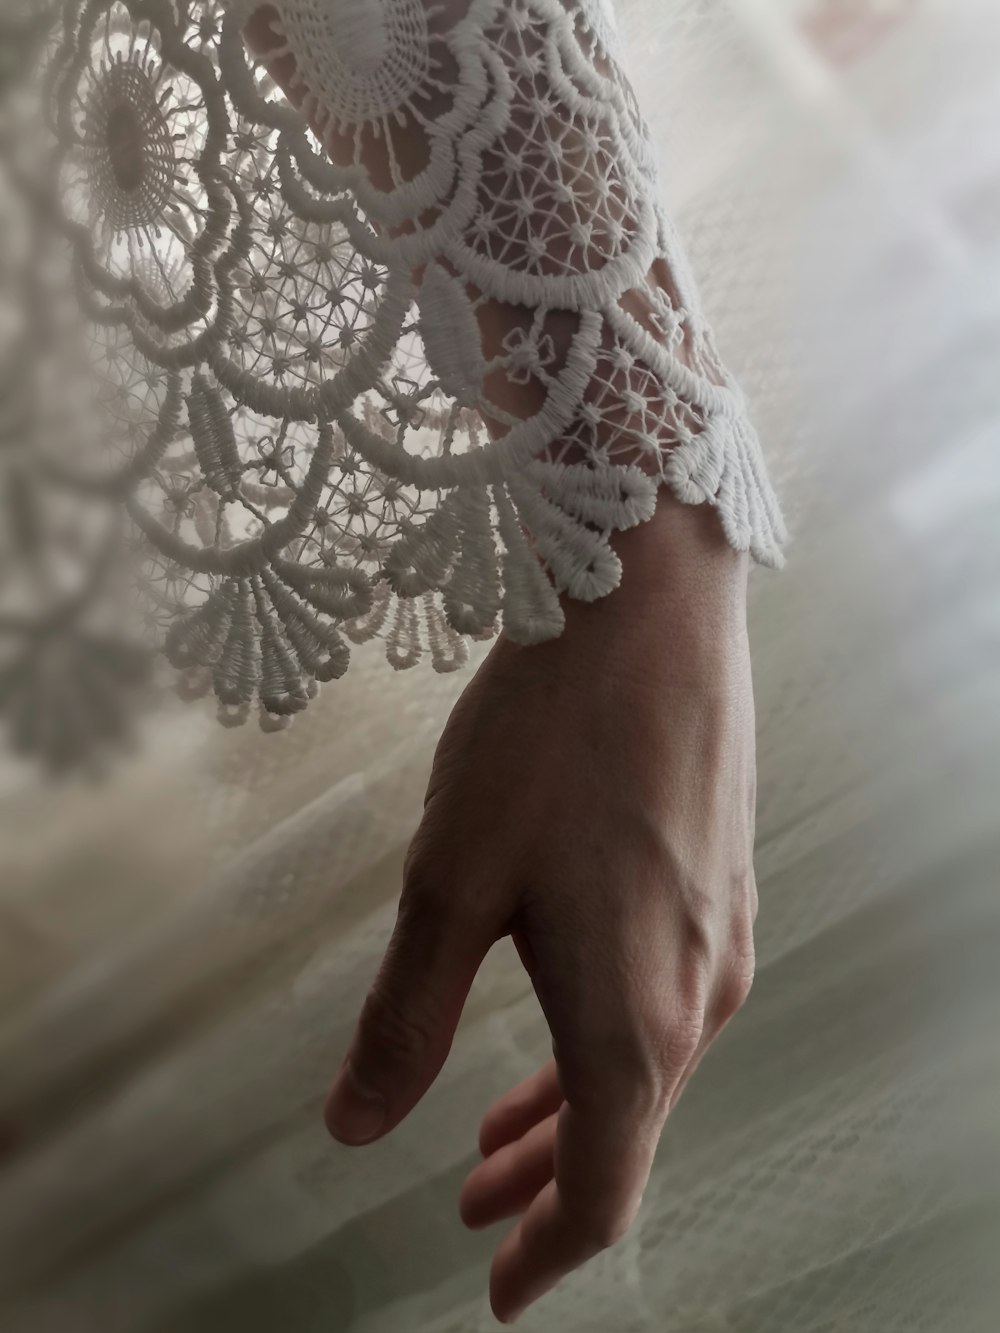 a person's hand is holding a lace doily